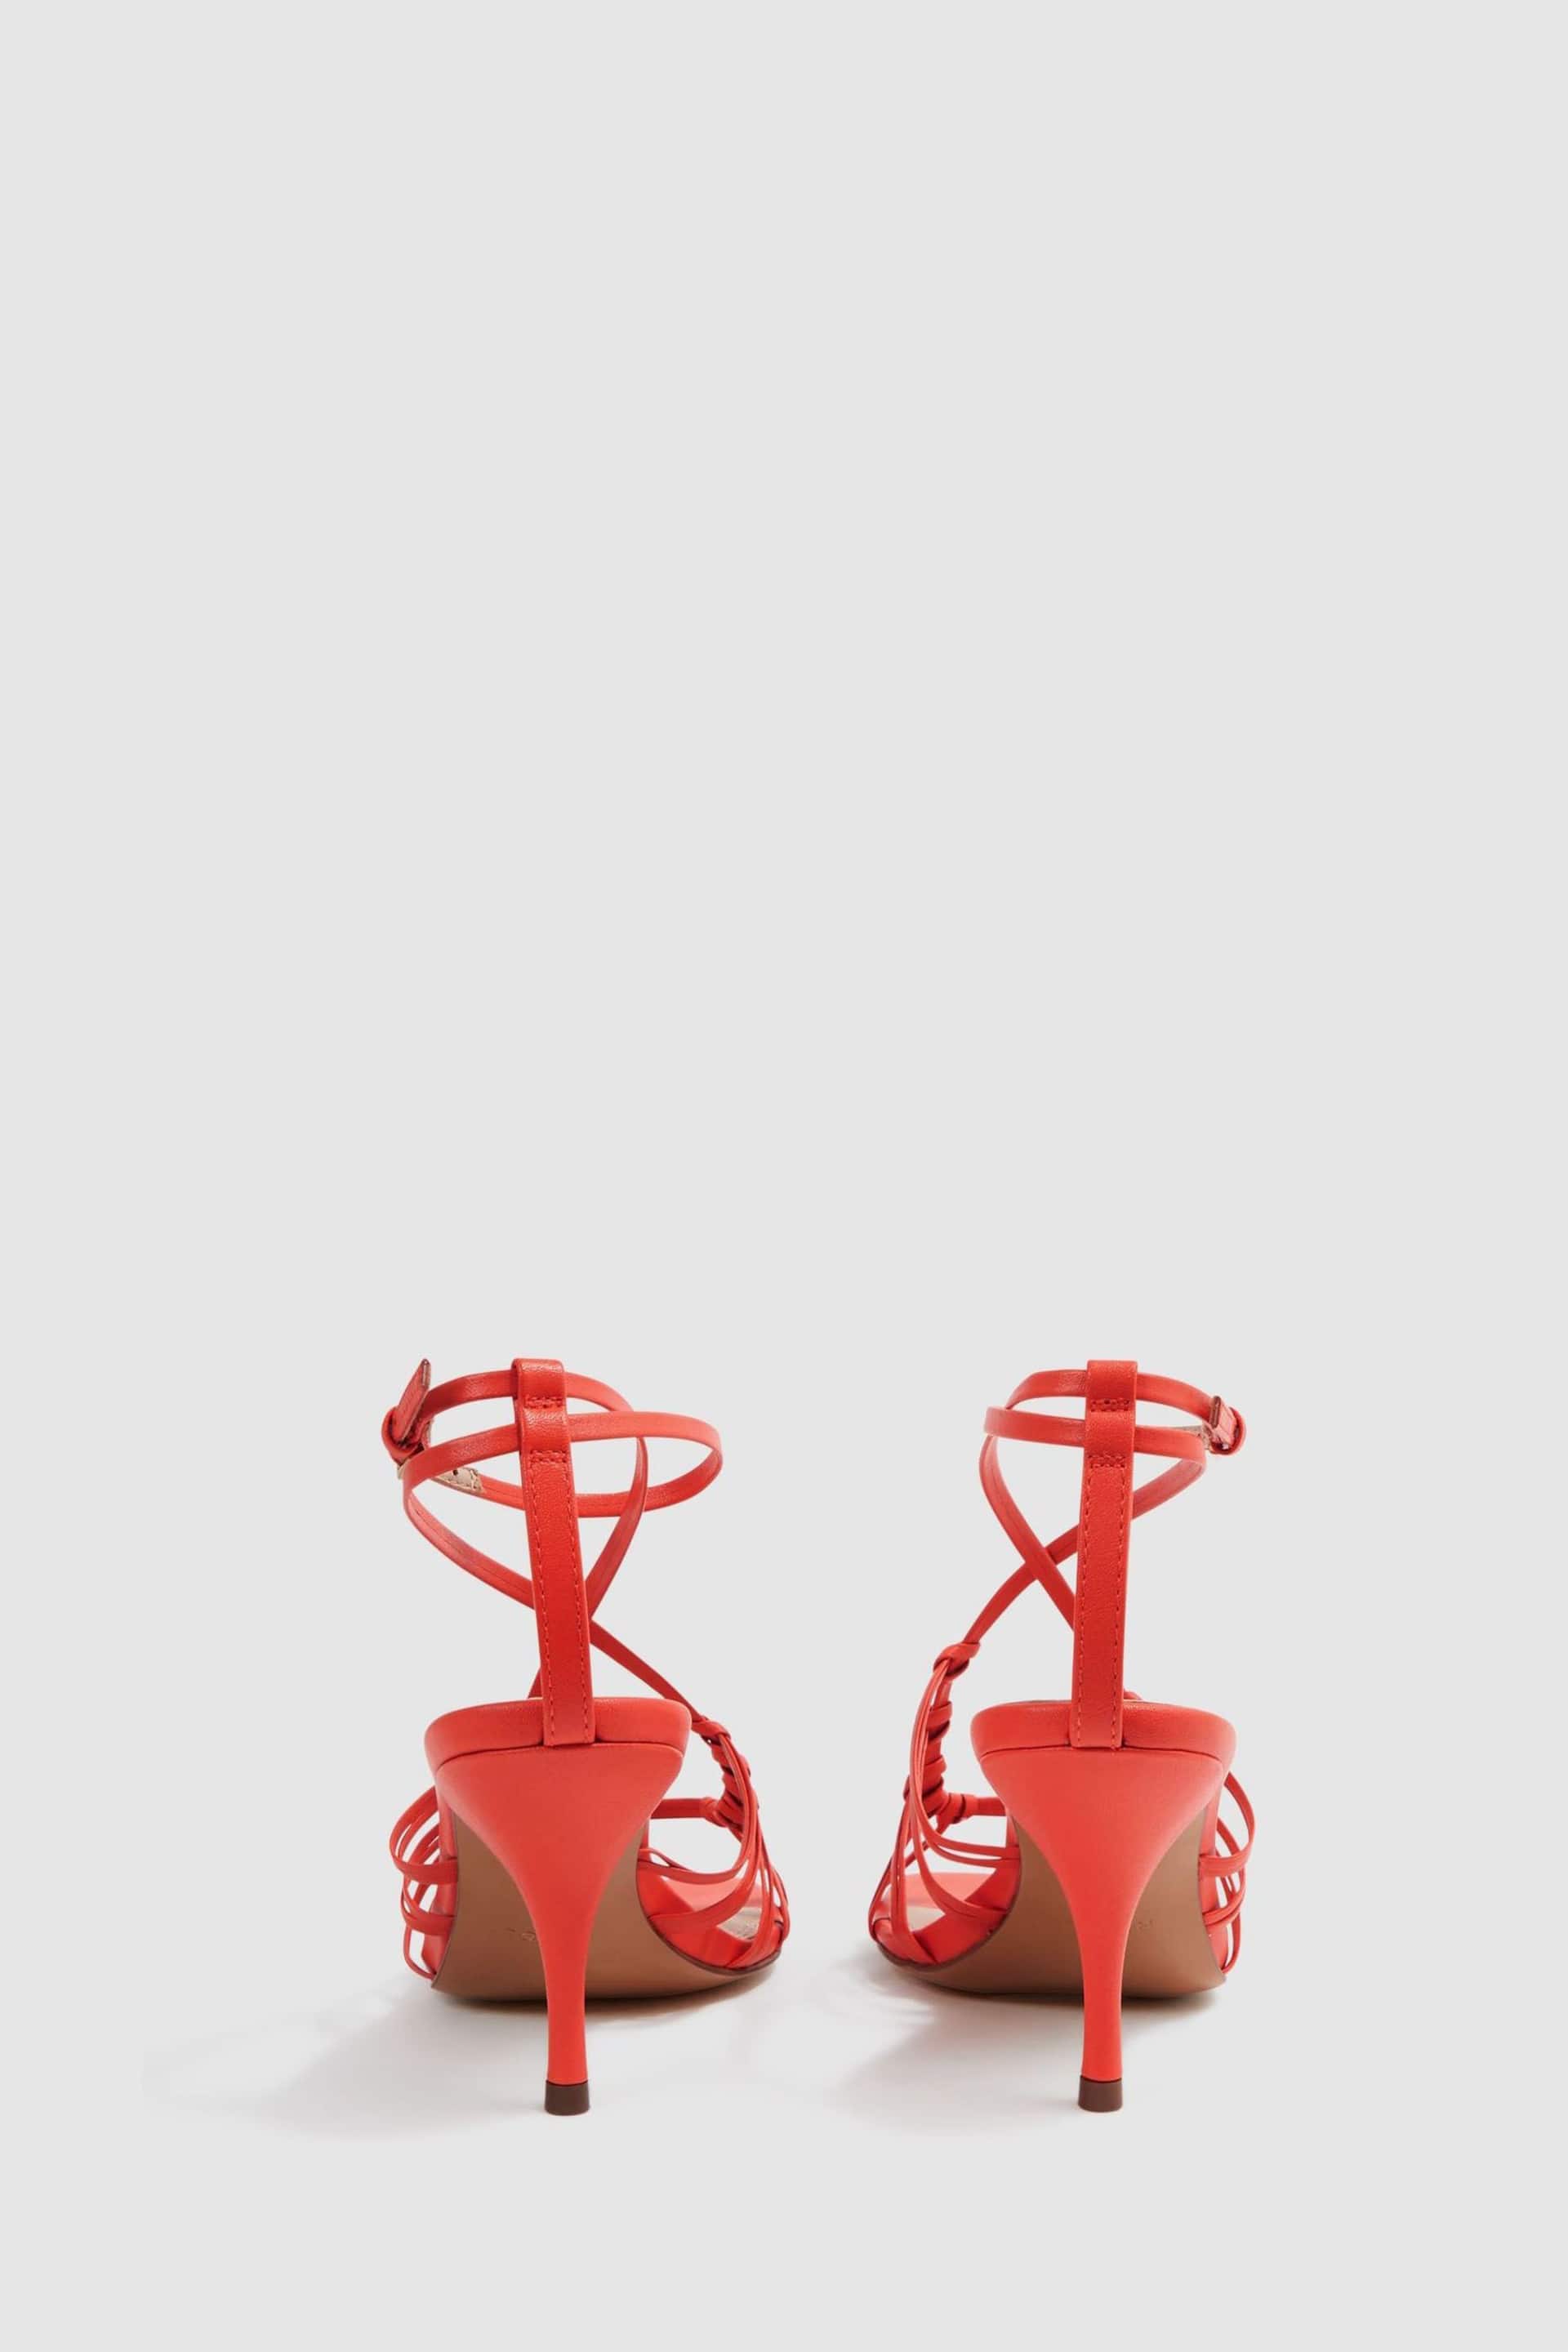 Reiss Coral Eva Leather Strappy Heels - Image 4 of 5